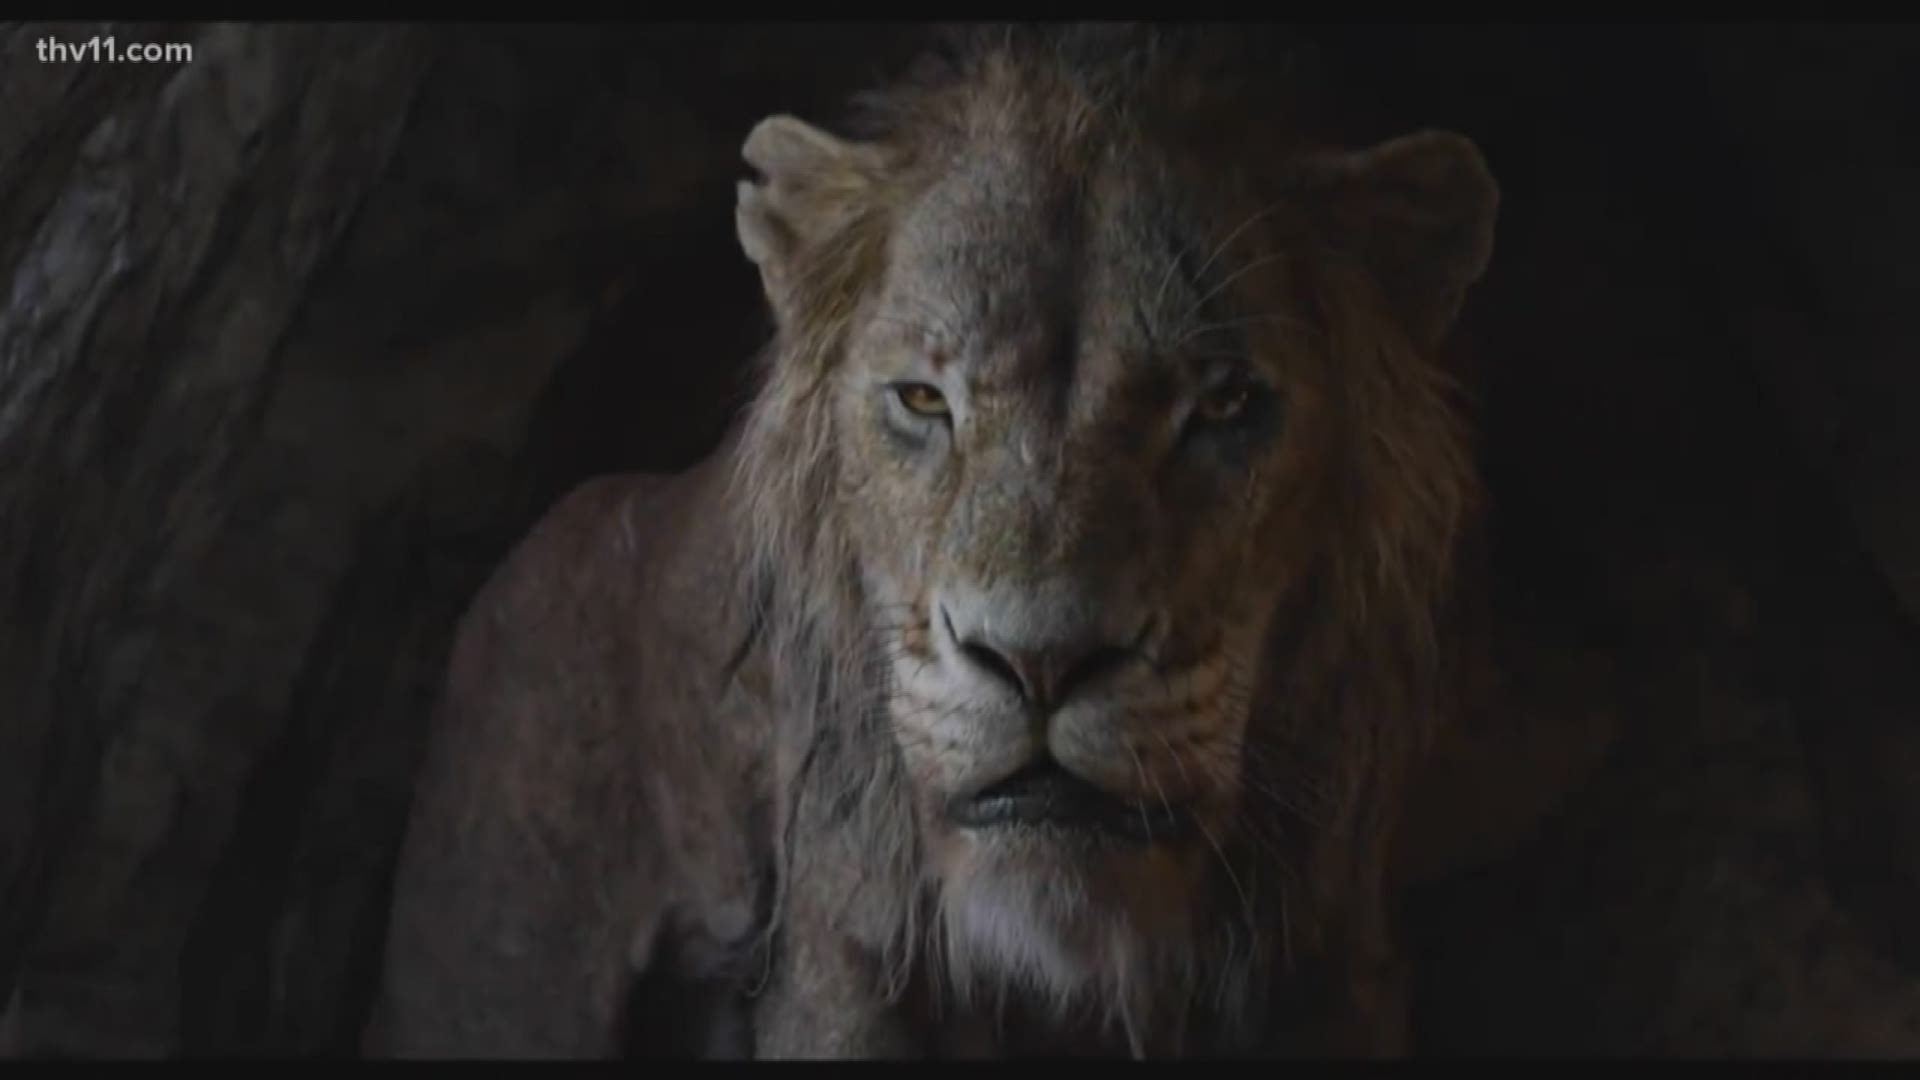 JD Roberts' with Getting Reel shared his take on Disney's live-action version of The Lion King.